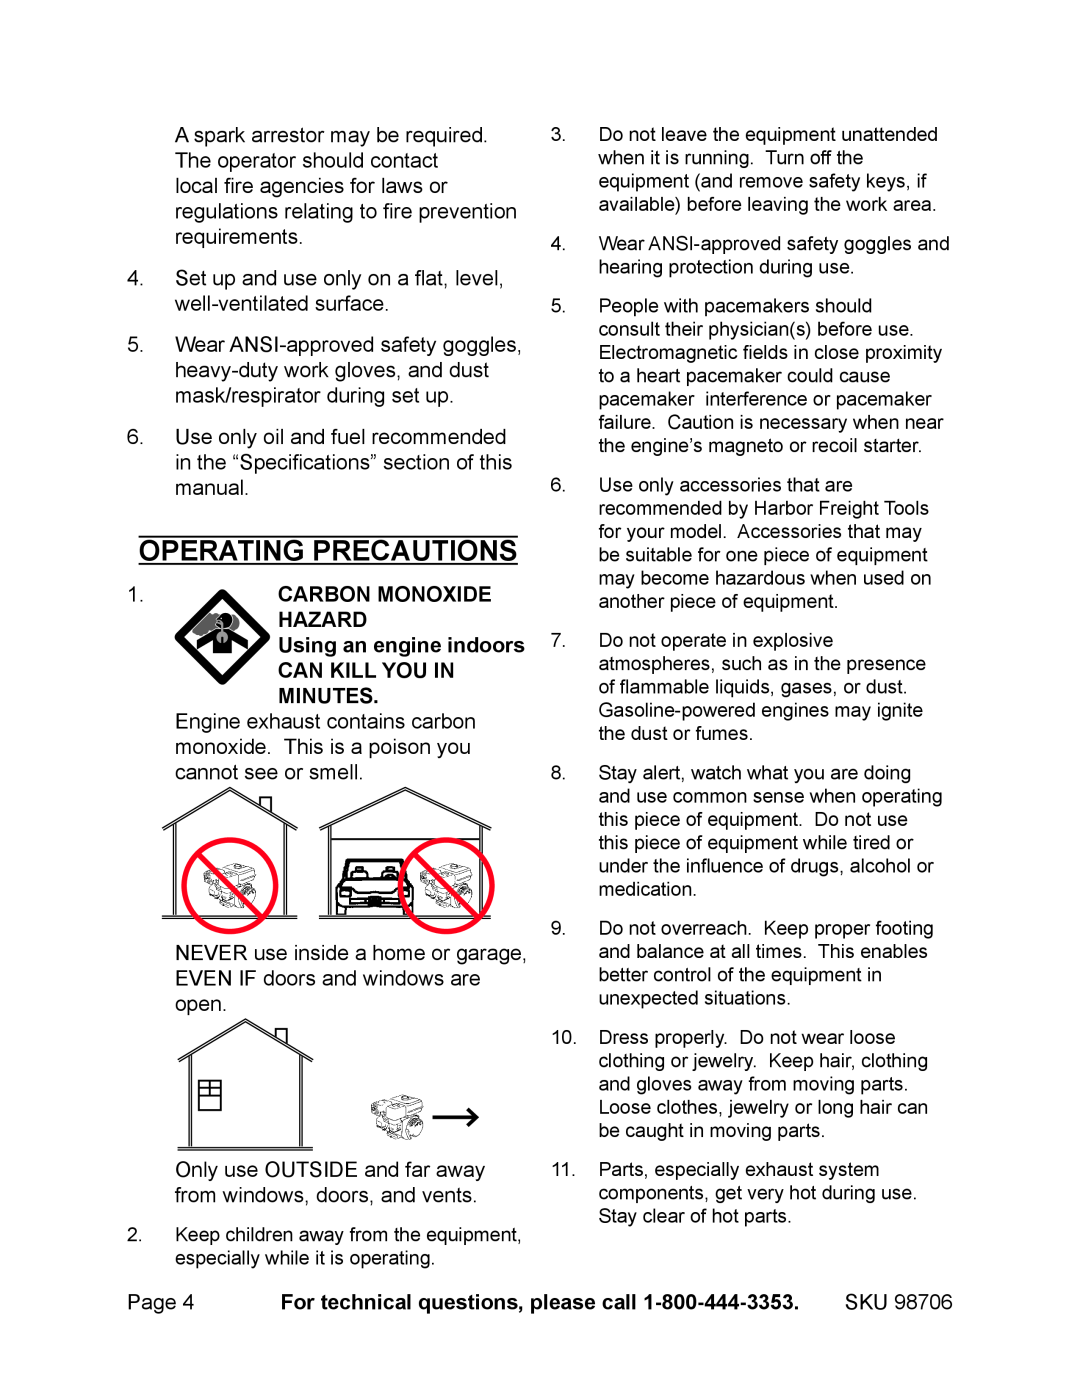 Chicago Electric 98706 Operating precautions, Carbon Monoxide Hazard Using an engine indoors, Can Kill You In Minutes 